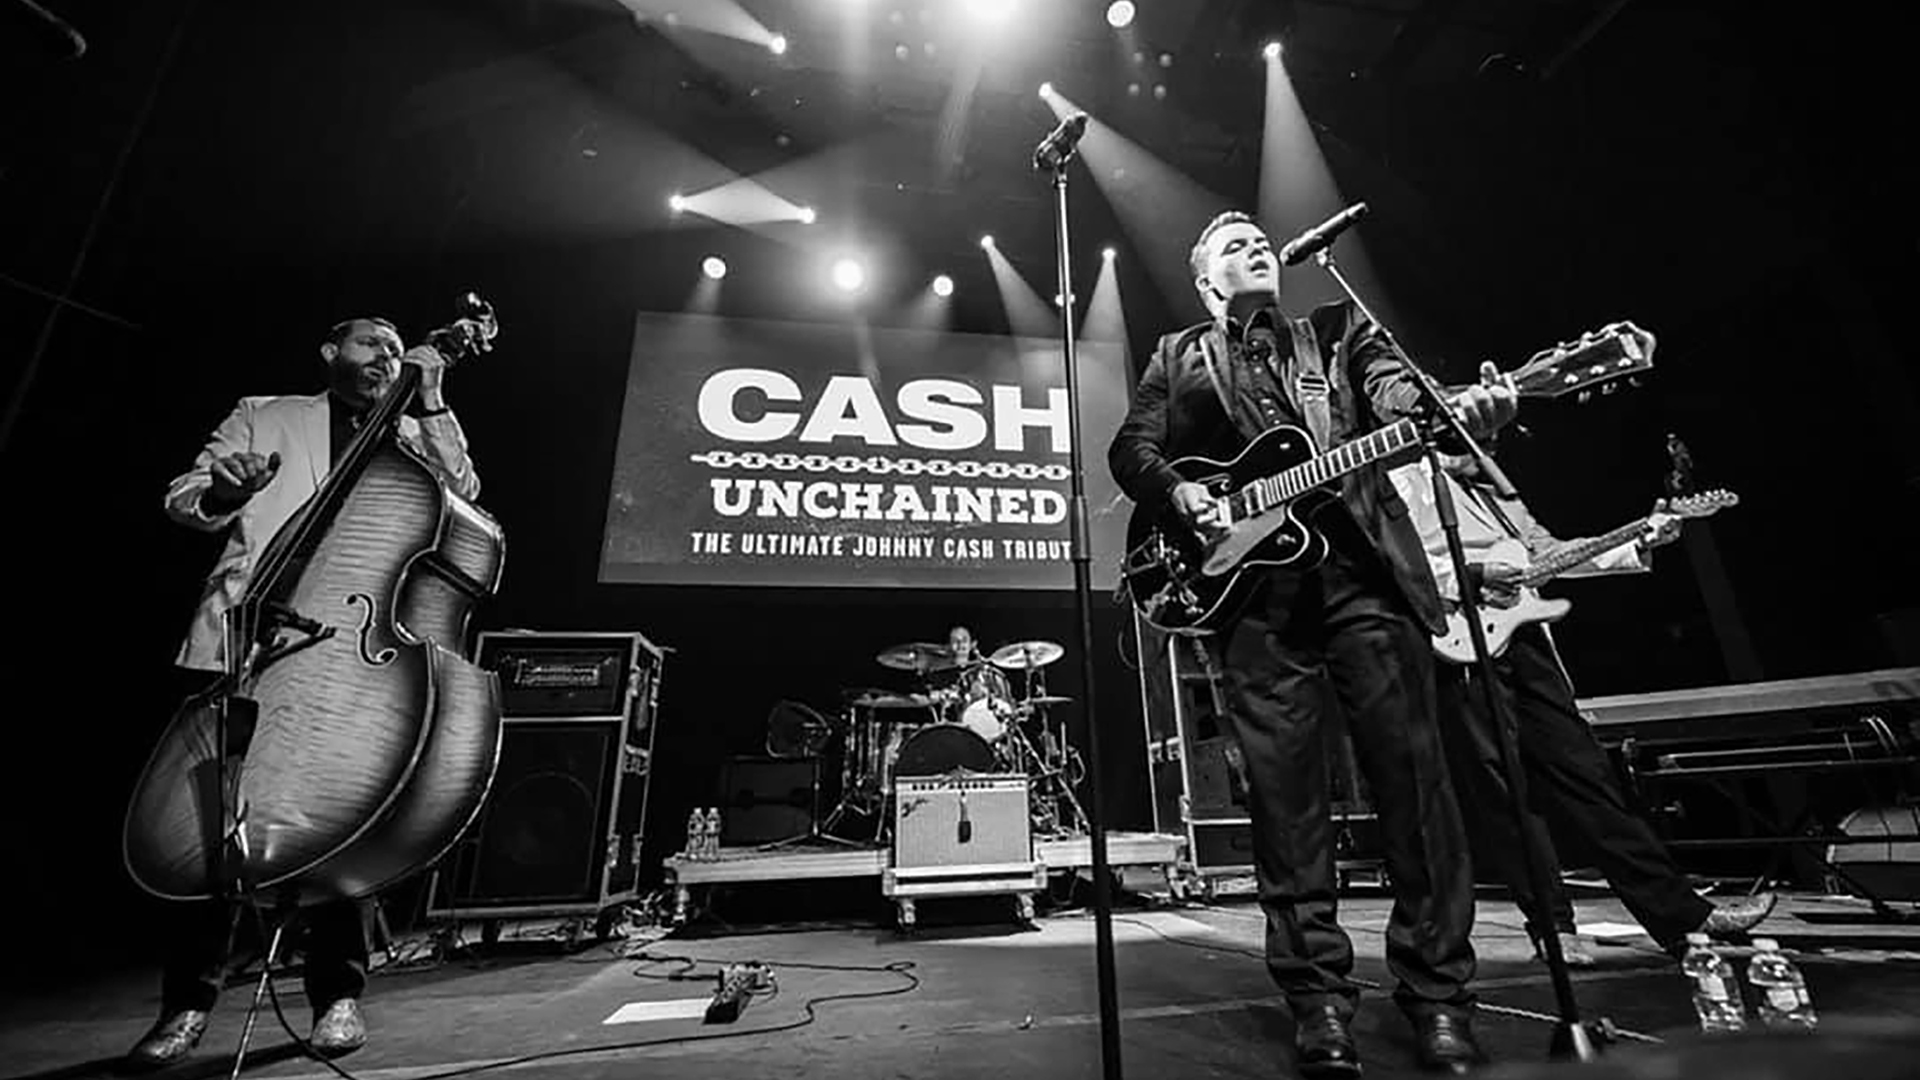 Cash Unchained 1920 x 1080